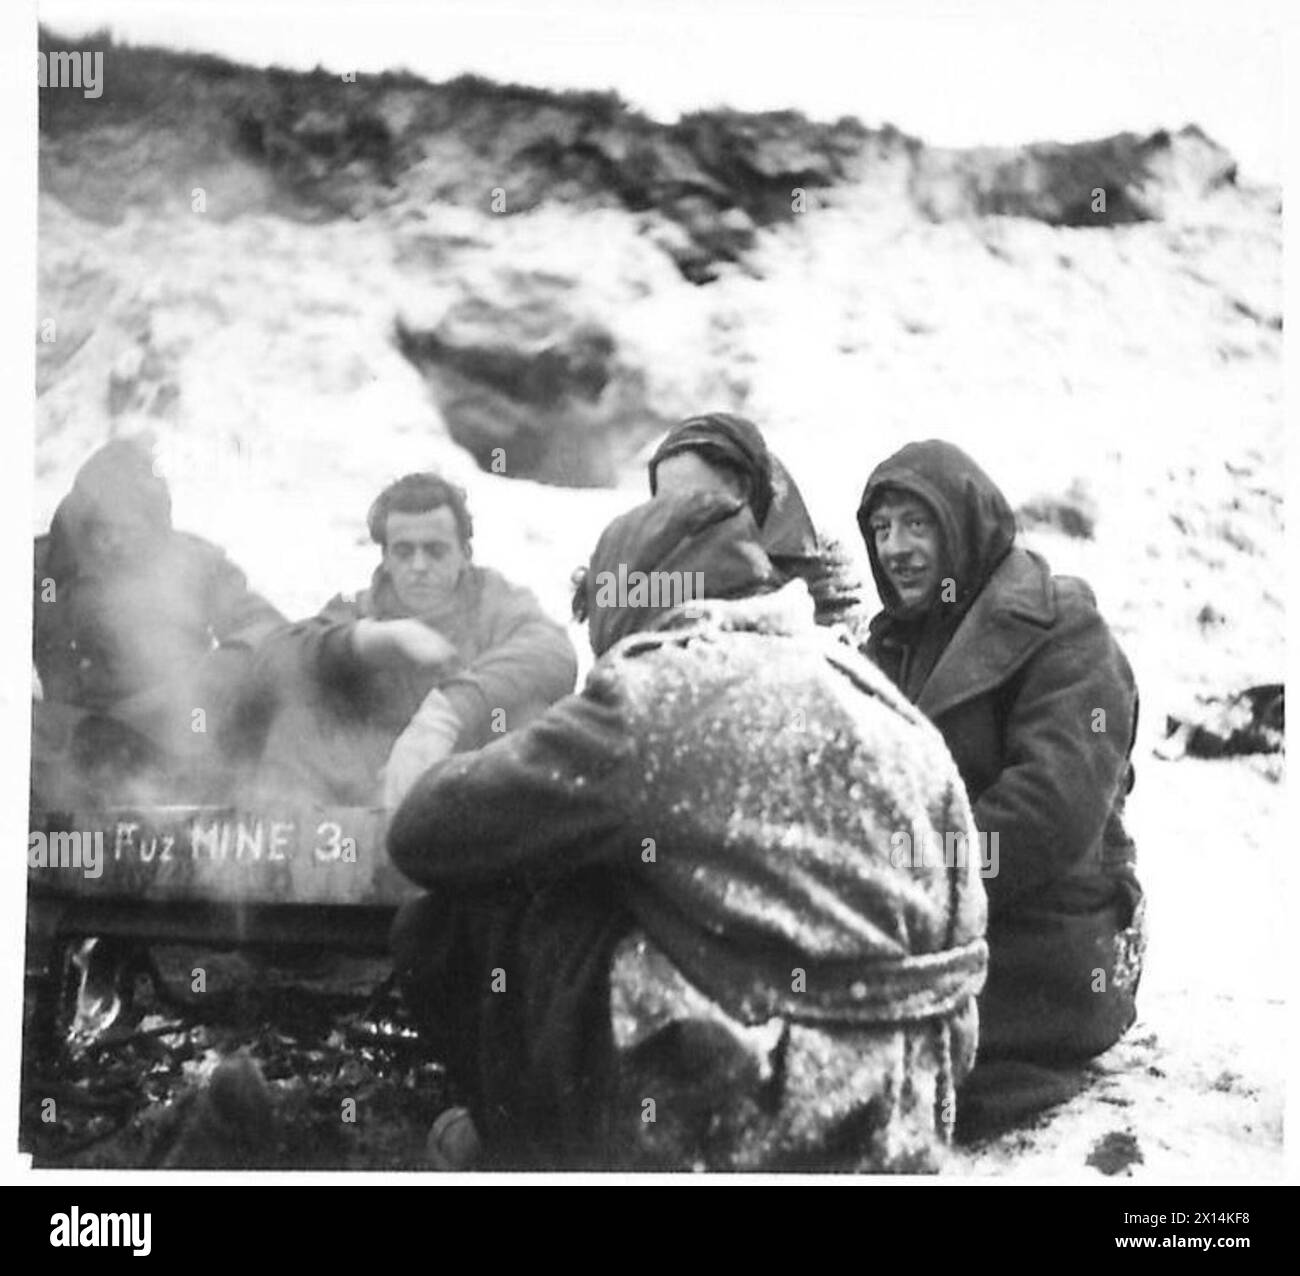 52 Div. WESTERN FRONT SNOW - It's all in a day's war work. Men of the 1st Batt. K.O.S.B. with snow andicicles, on their clothing, have a few minutes' respite from the trenches British Army, 21st Army Group Stock Photo